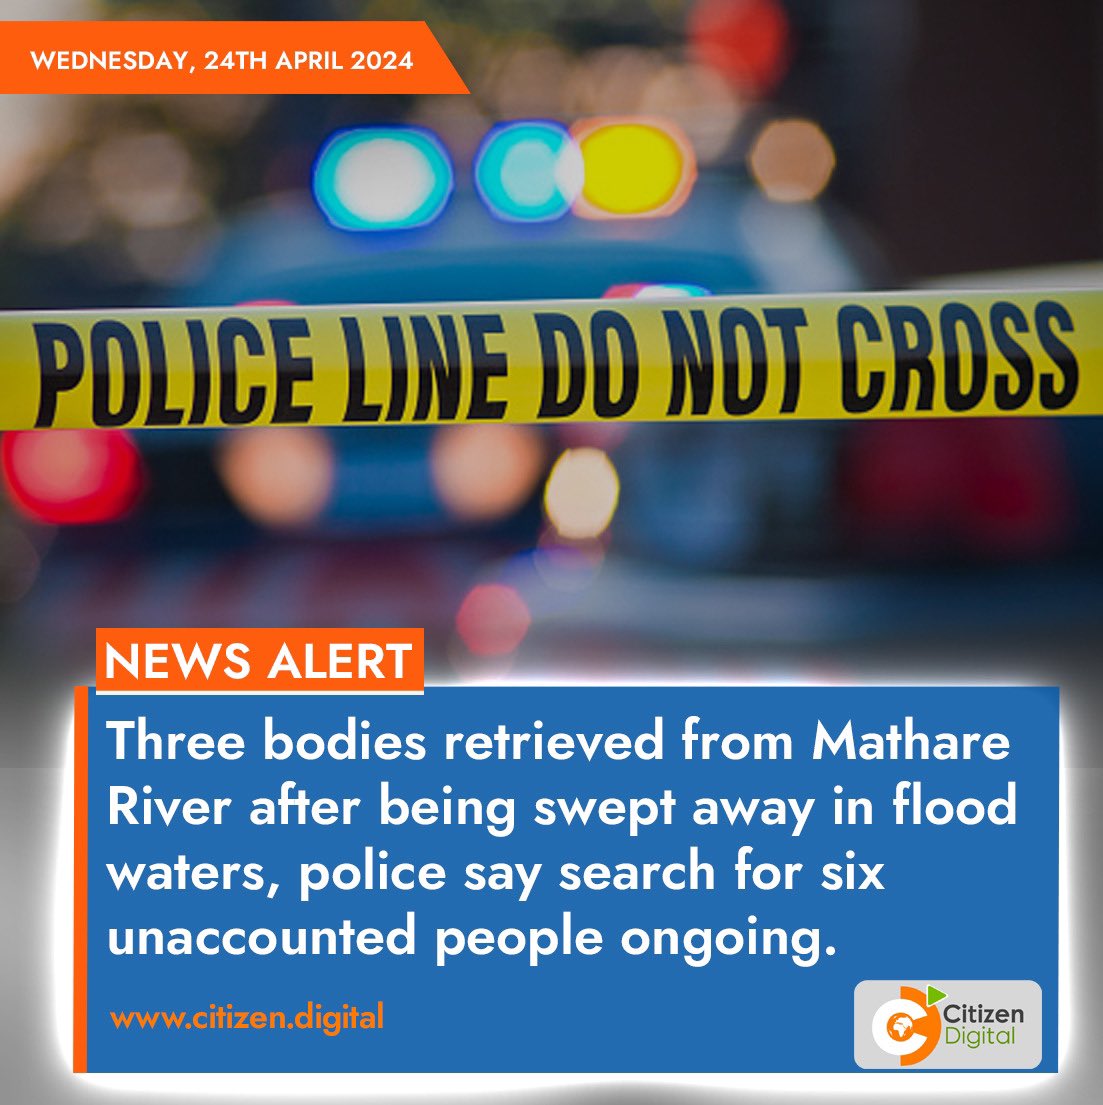 Three bodies retrieved from Mathare River after being swept away in flood waters, police say search for six unaccounted people ongoing.